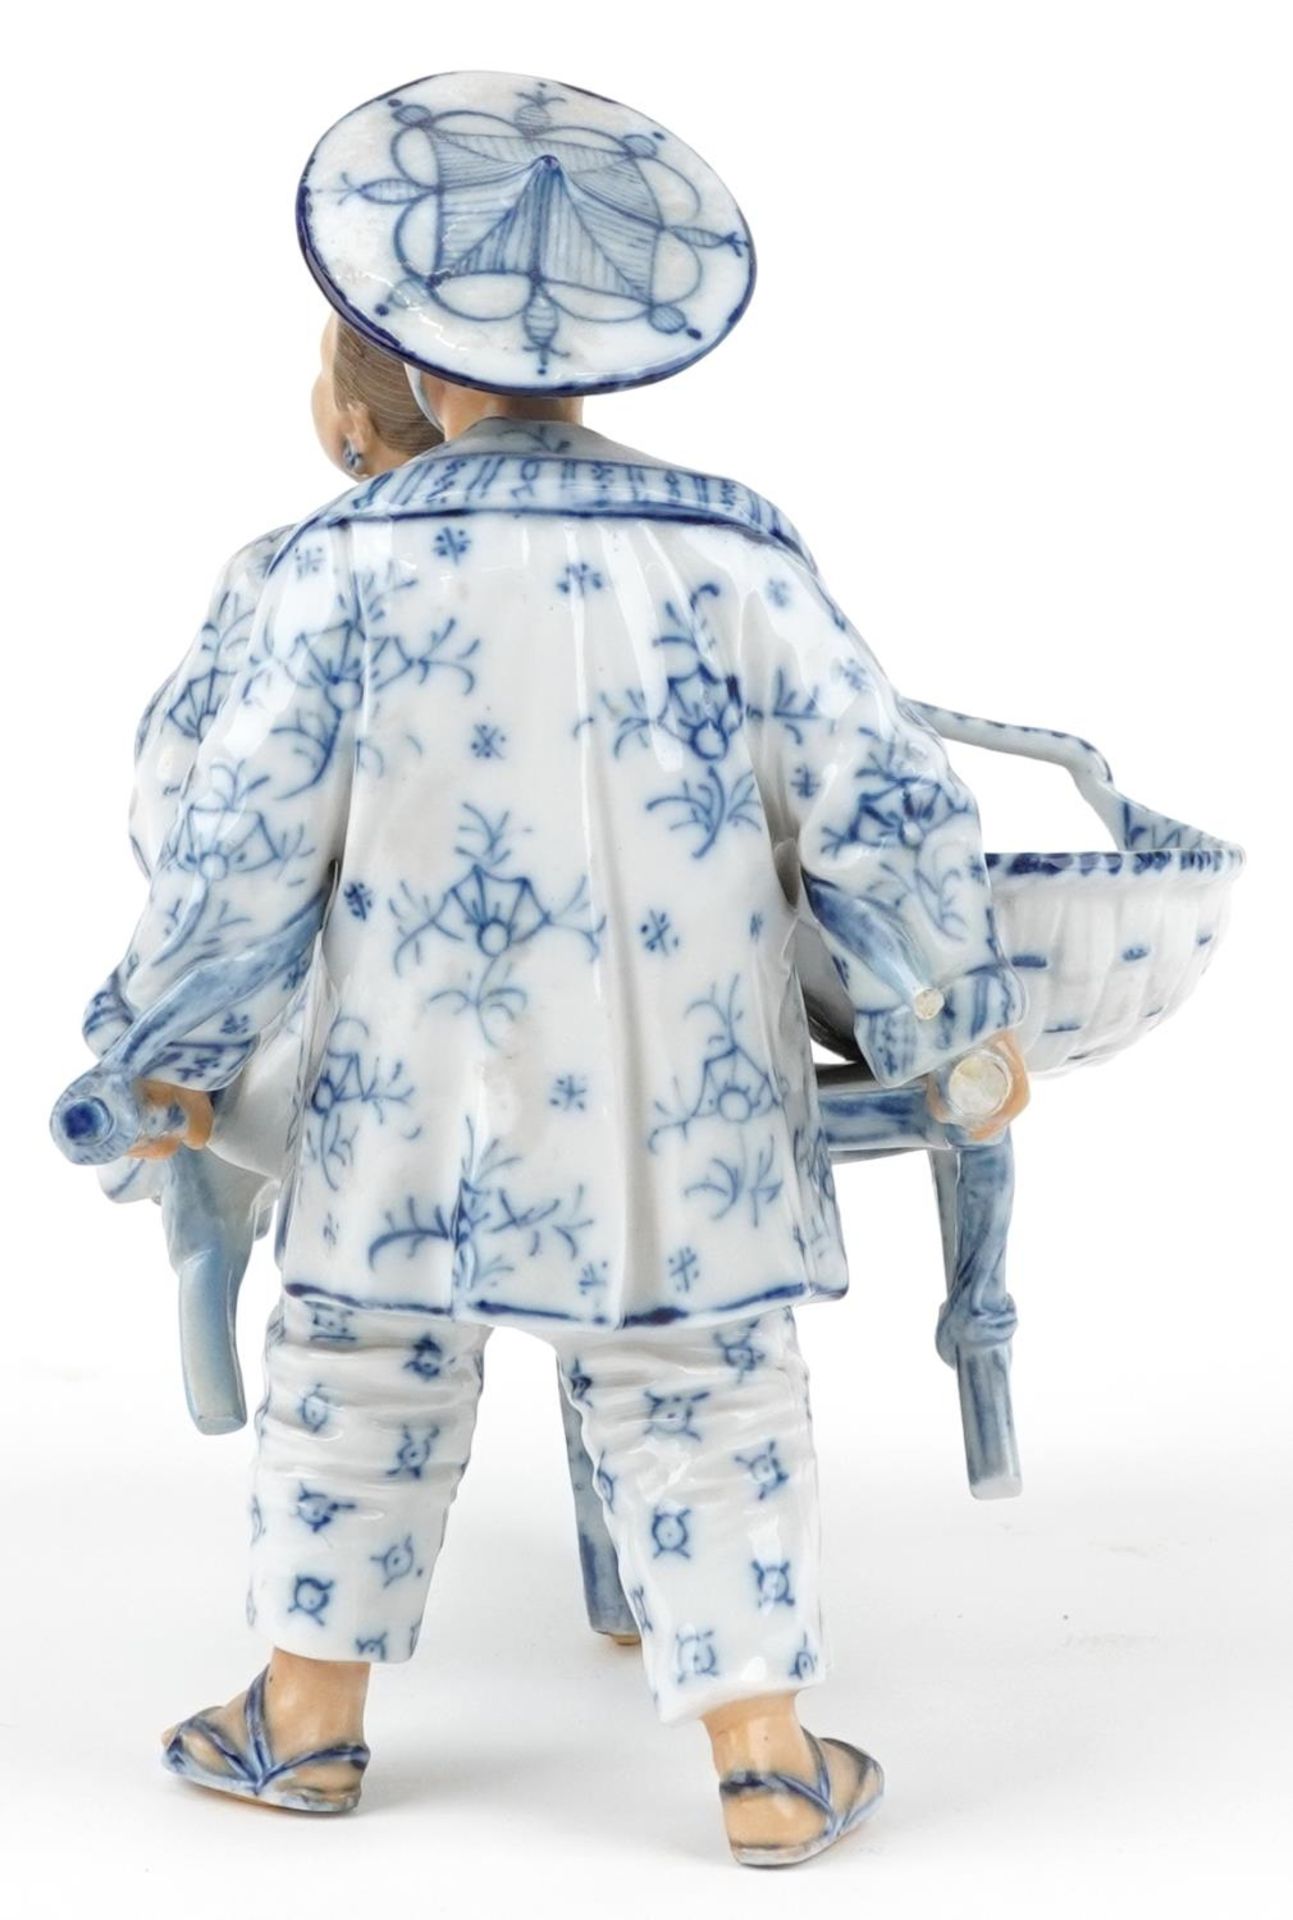 19th century European porcelain sweetmeat dish in the form of a Chinaman with rickshaw - Image 4 of 7